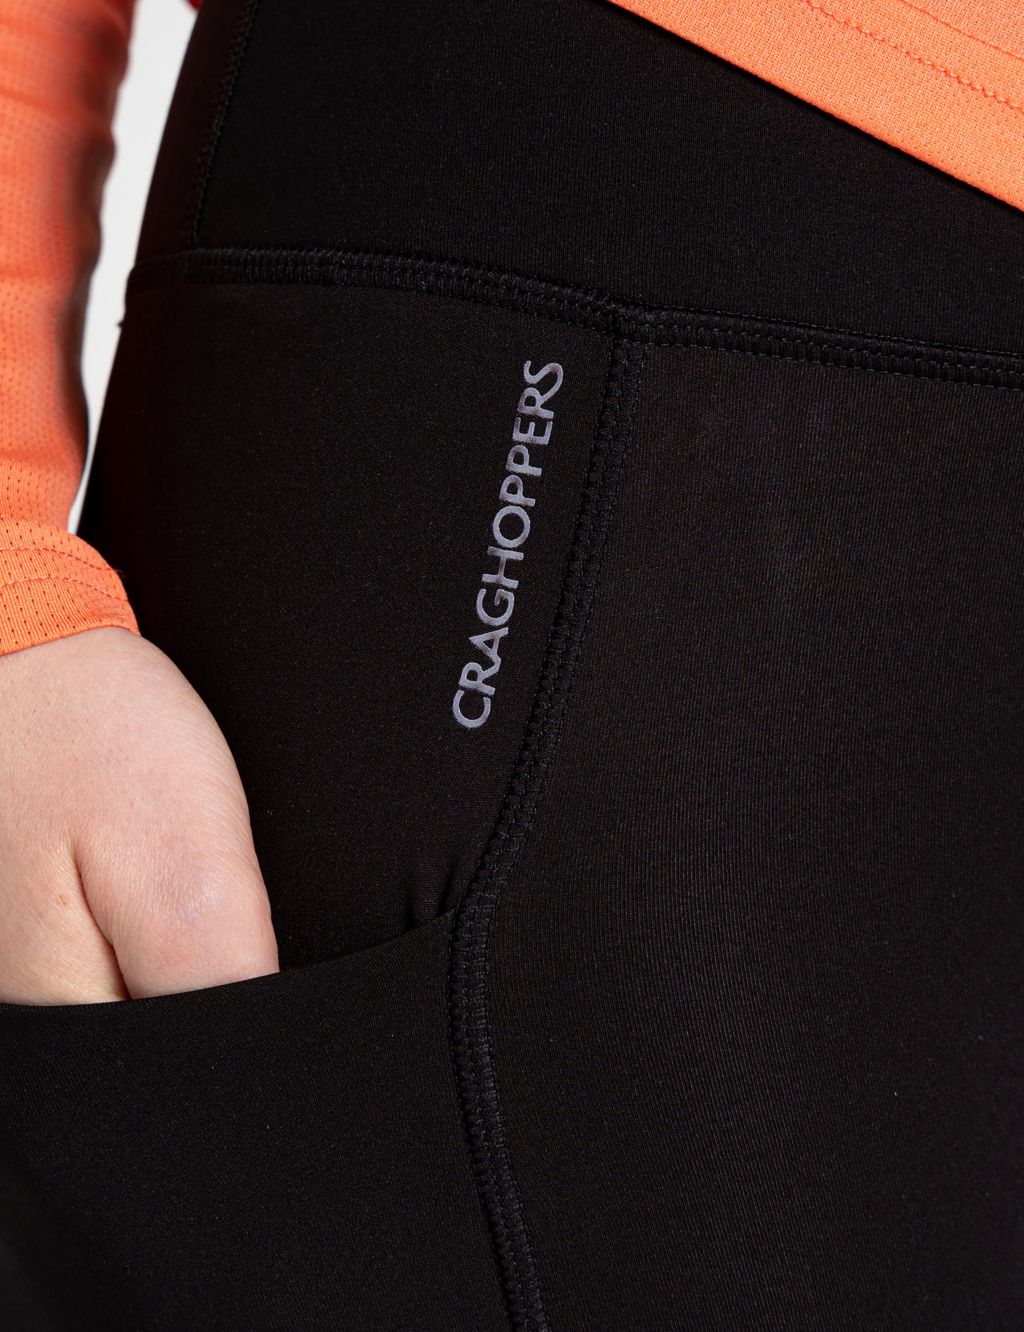 Kiwipro Thermo Leggings | Craghoppers | M&S